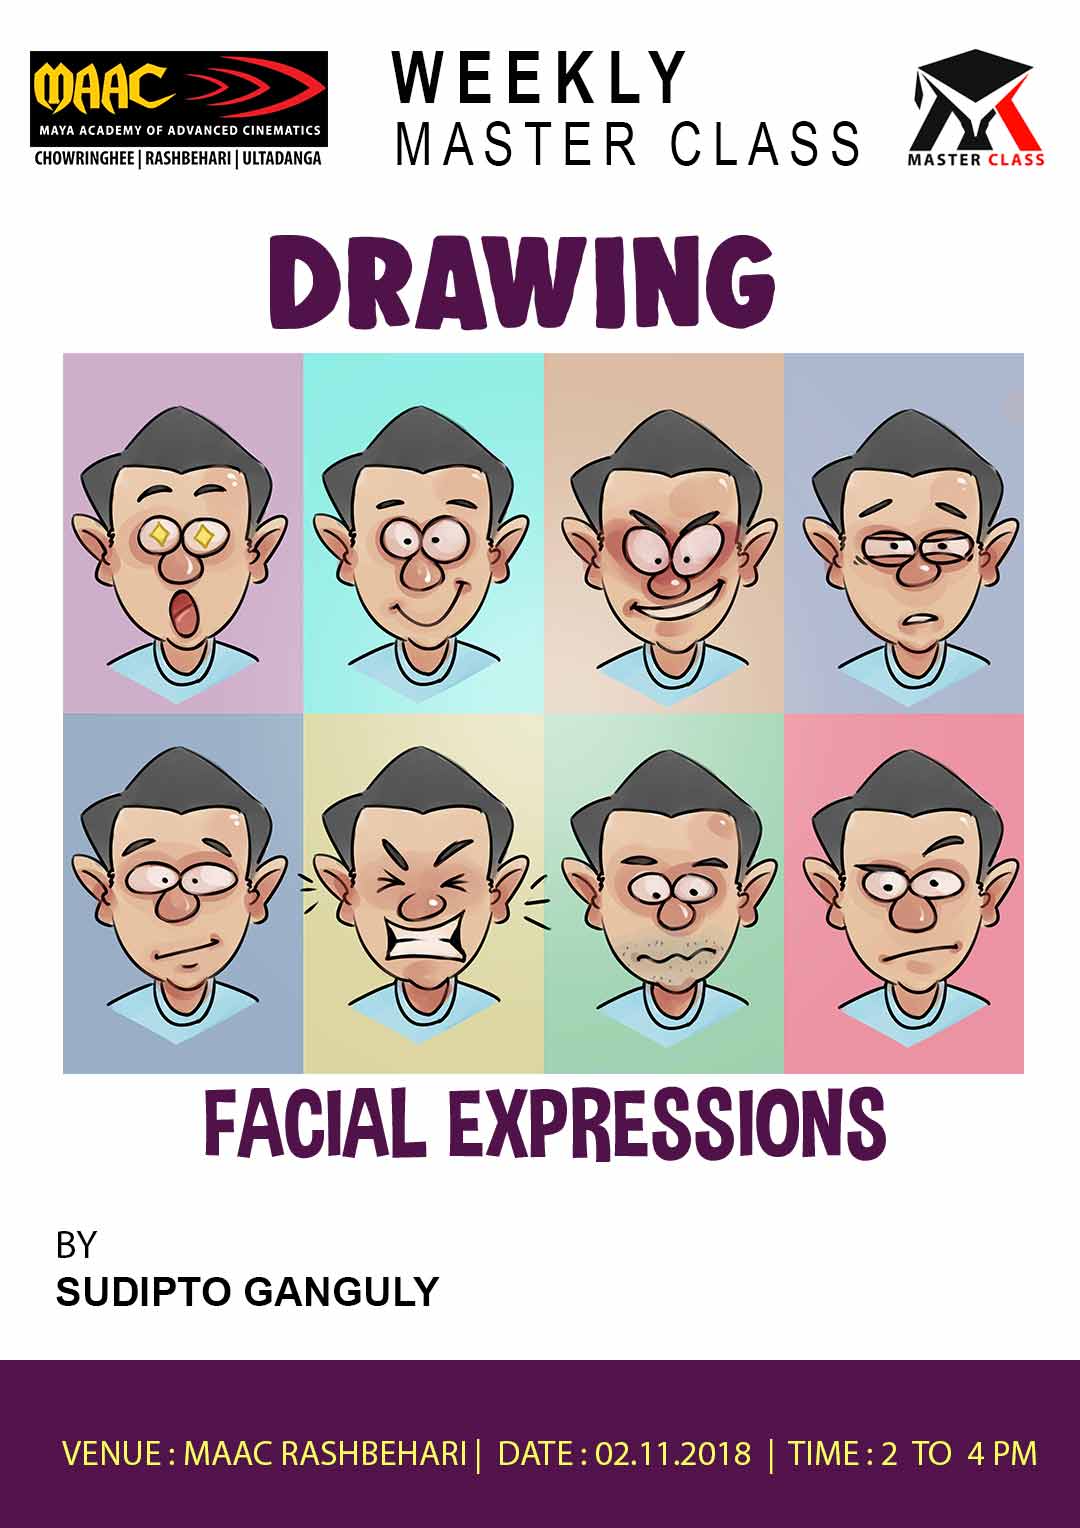 Weekly Master Class on Drawing Facial Expressions